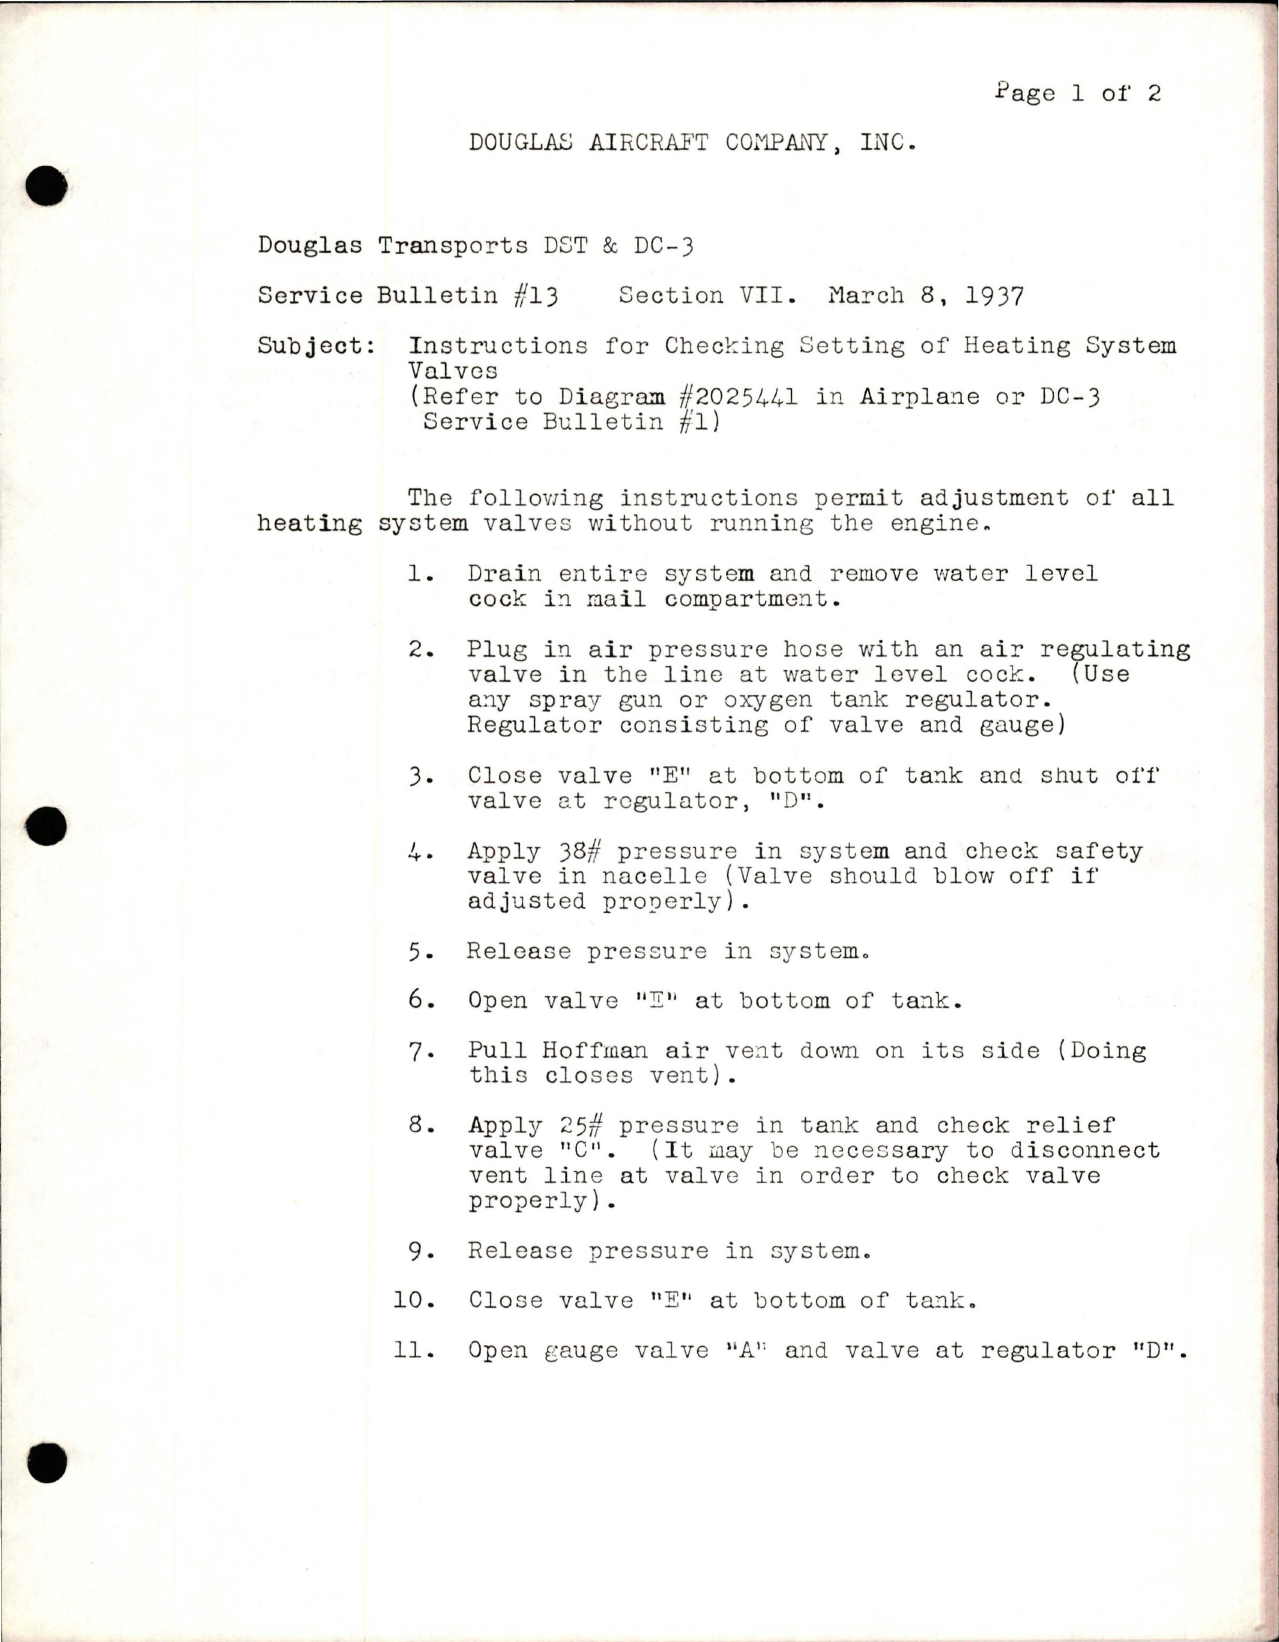 Sample page 1 from AirCorps Library document: Instructions for Checking Setting of Heating System Valves